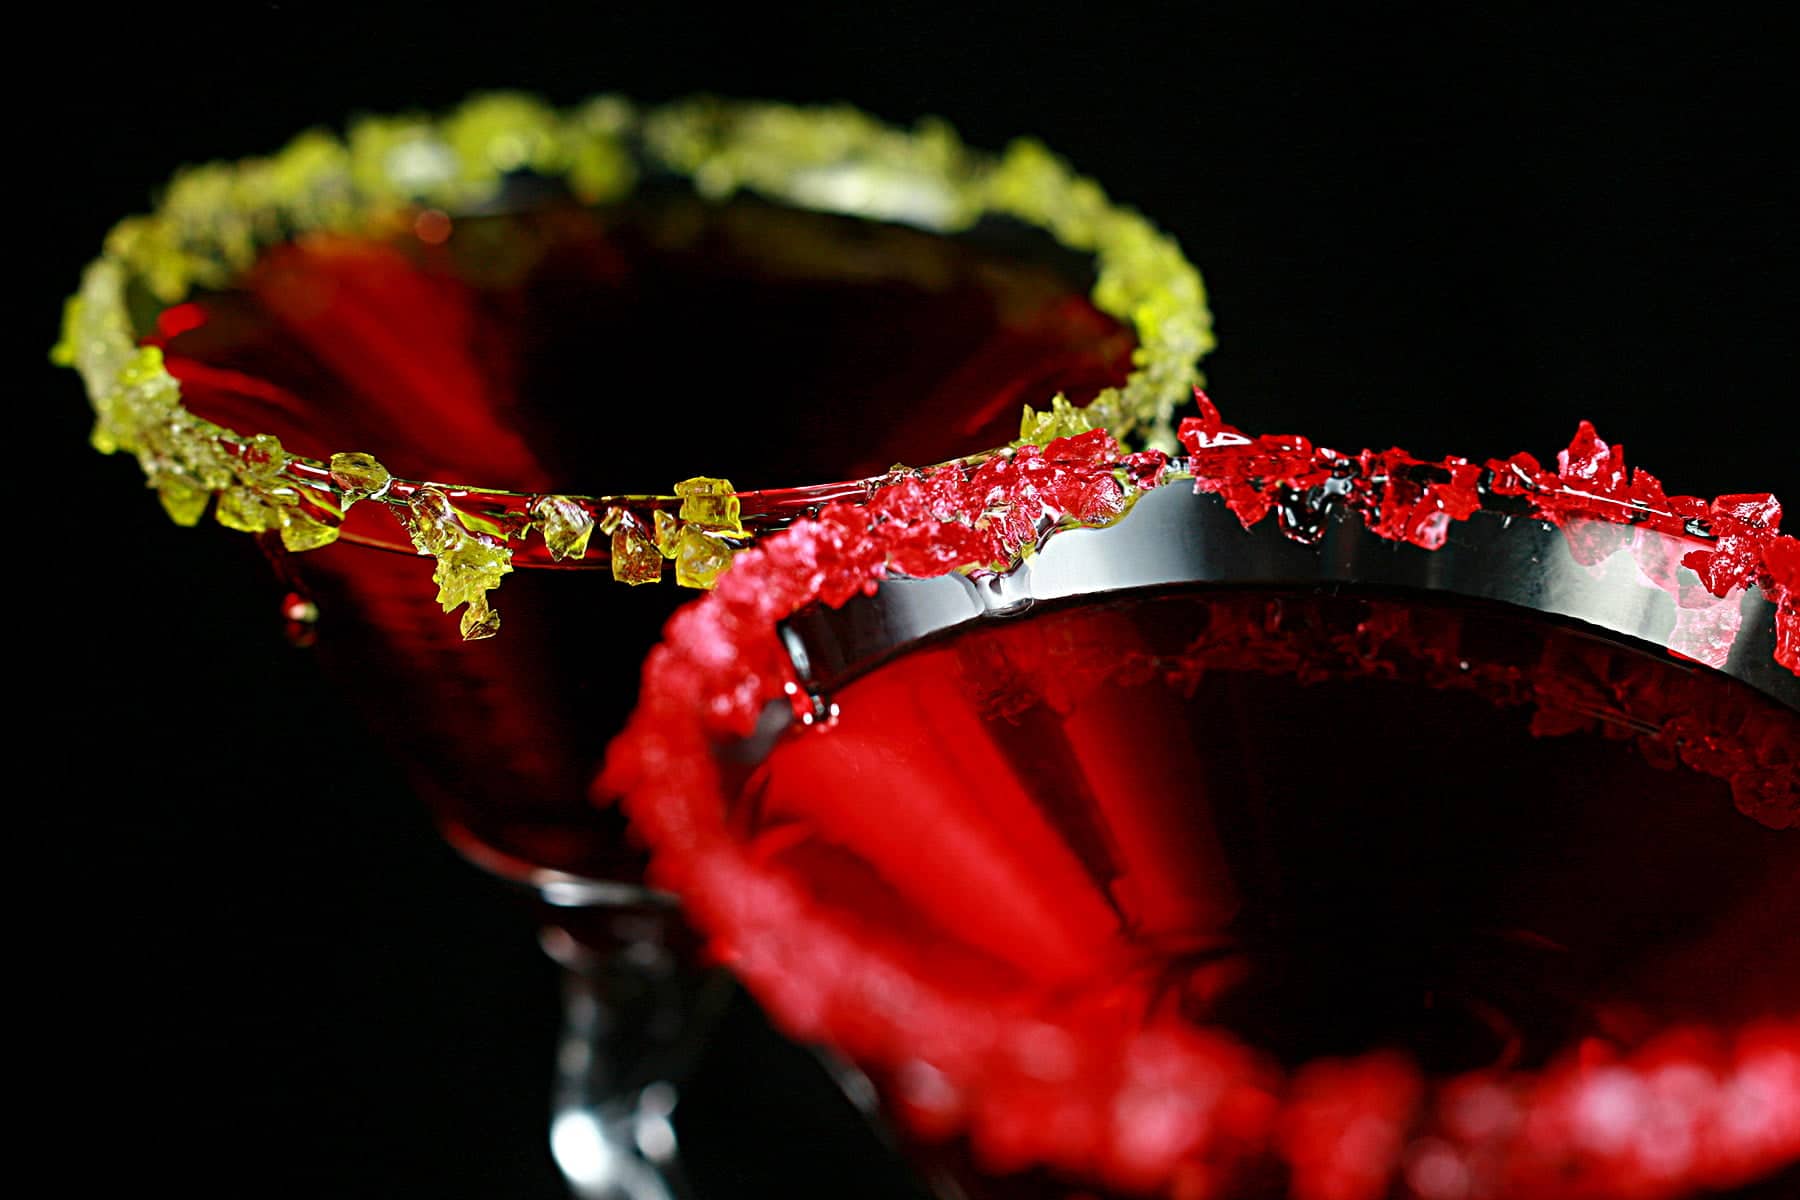 Two Martini cocktails - a Red drink in a martini glass. One is rimmed with crushed green candy, the other is rimmed with a red crushed candy.